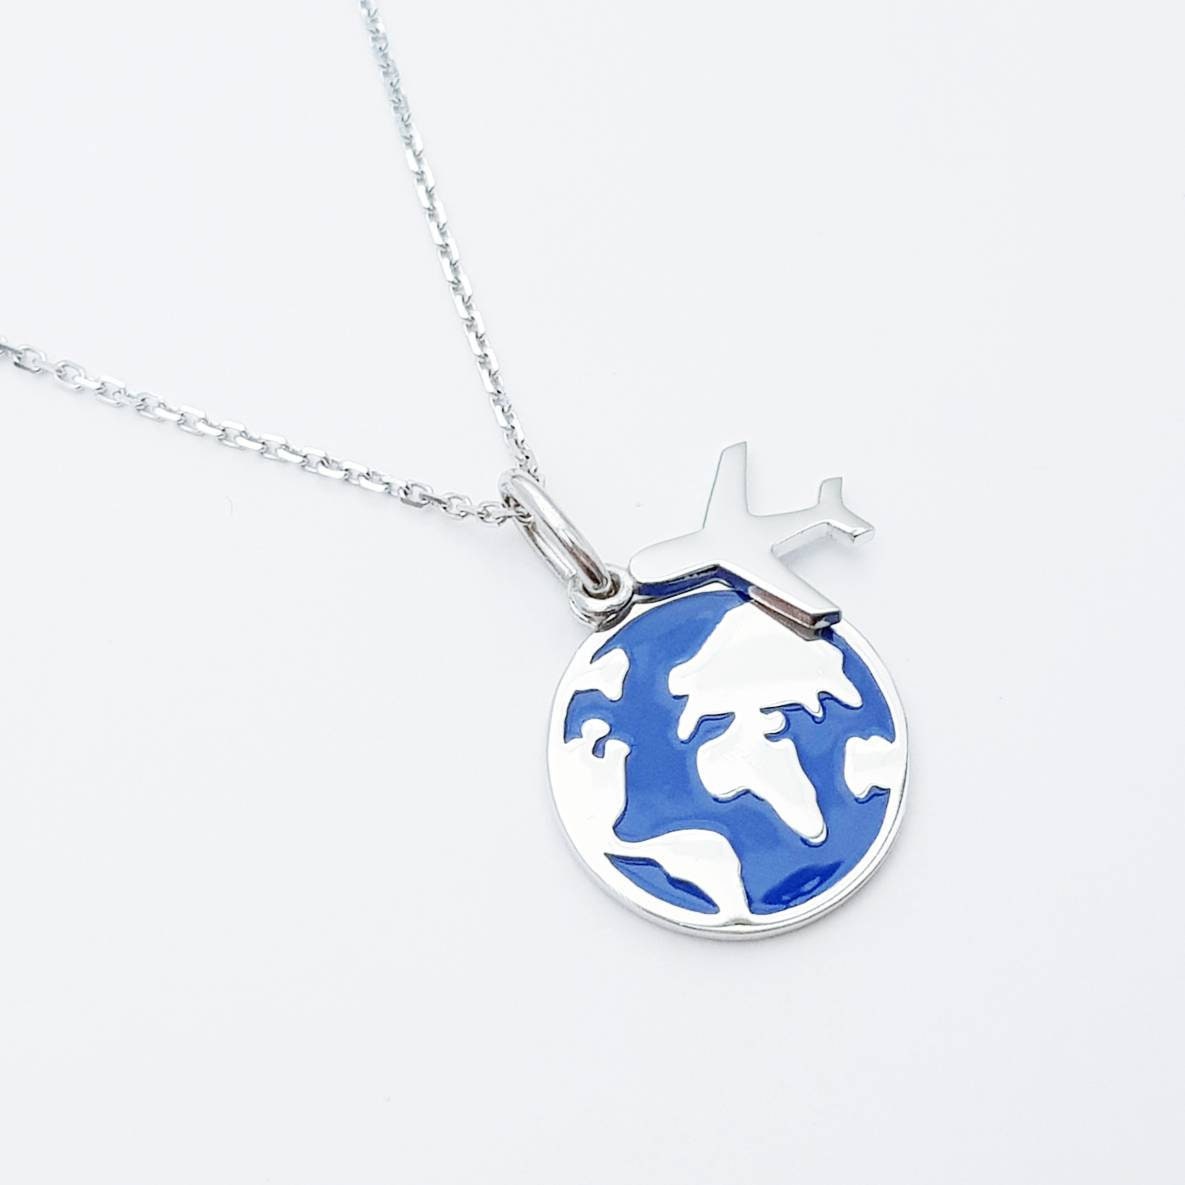 Travel pendant with enameled blue world pendant and airplane charm, Wanderlust necklace, gift for traveller